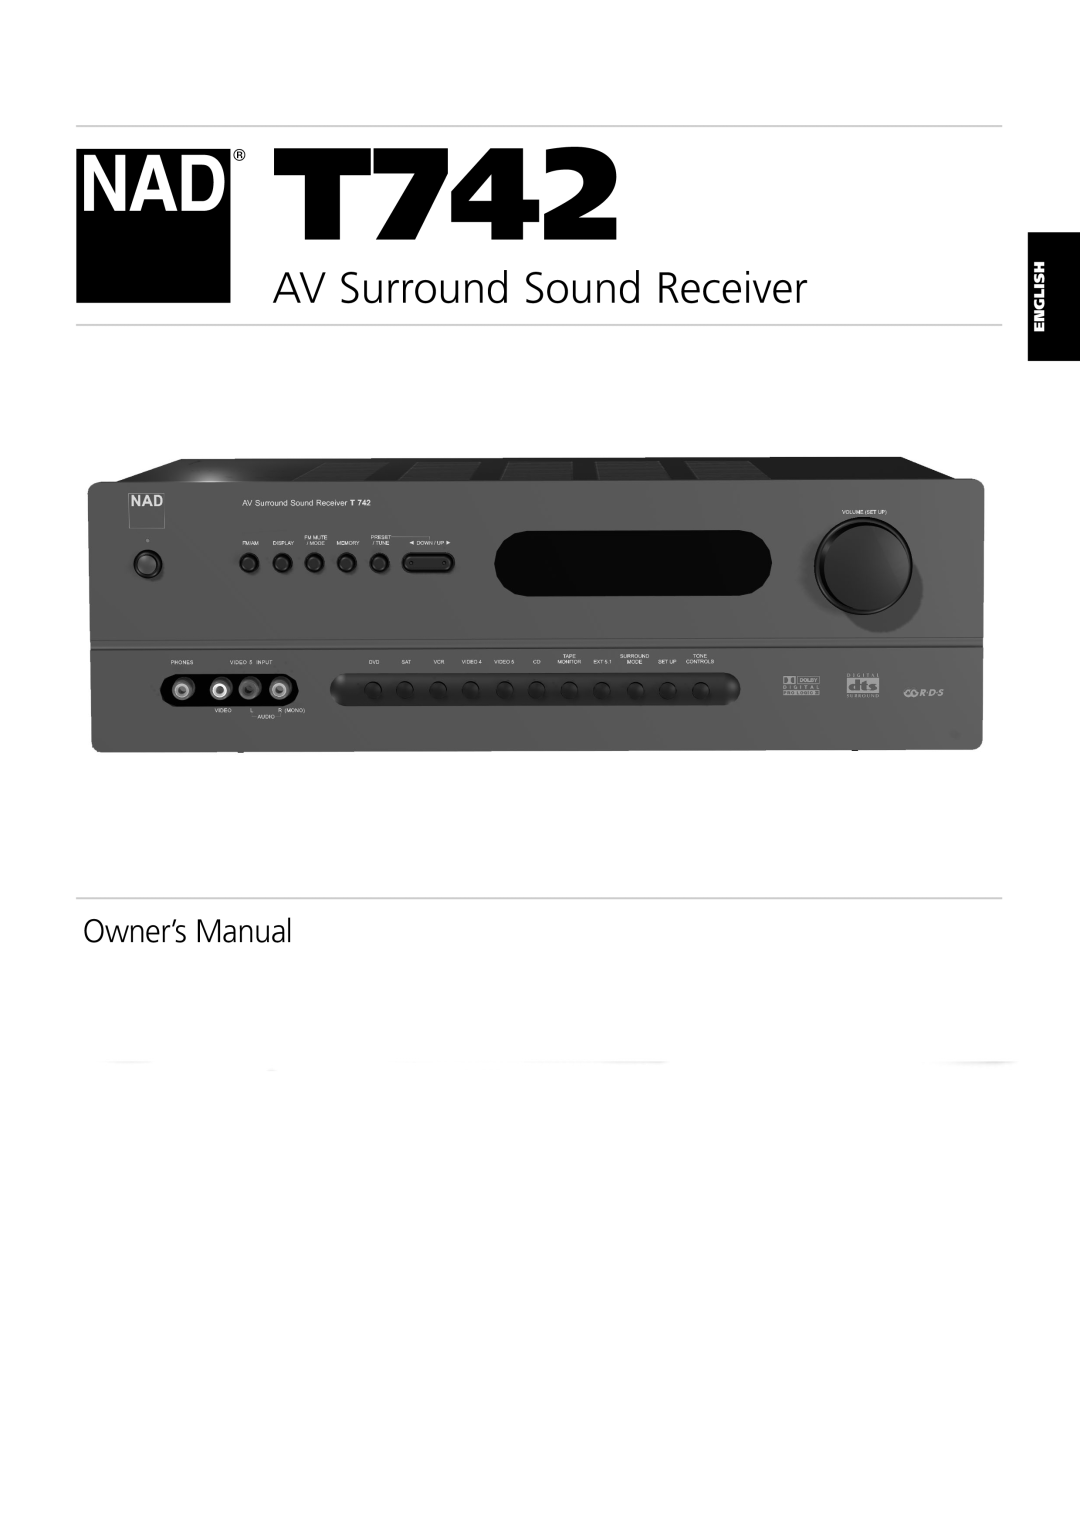 NAD T742 owner manual English, AV Surround Sound Receiver 